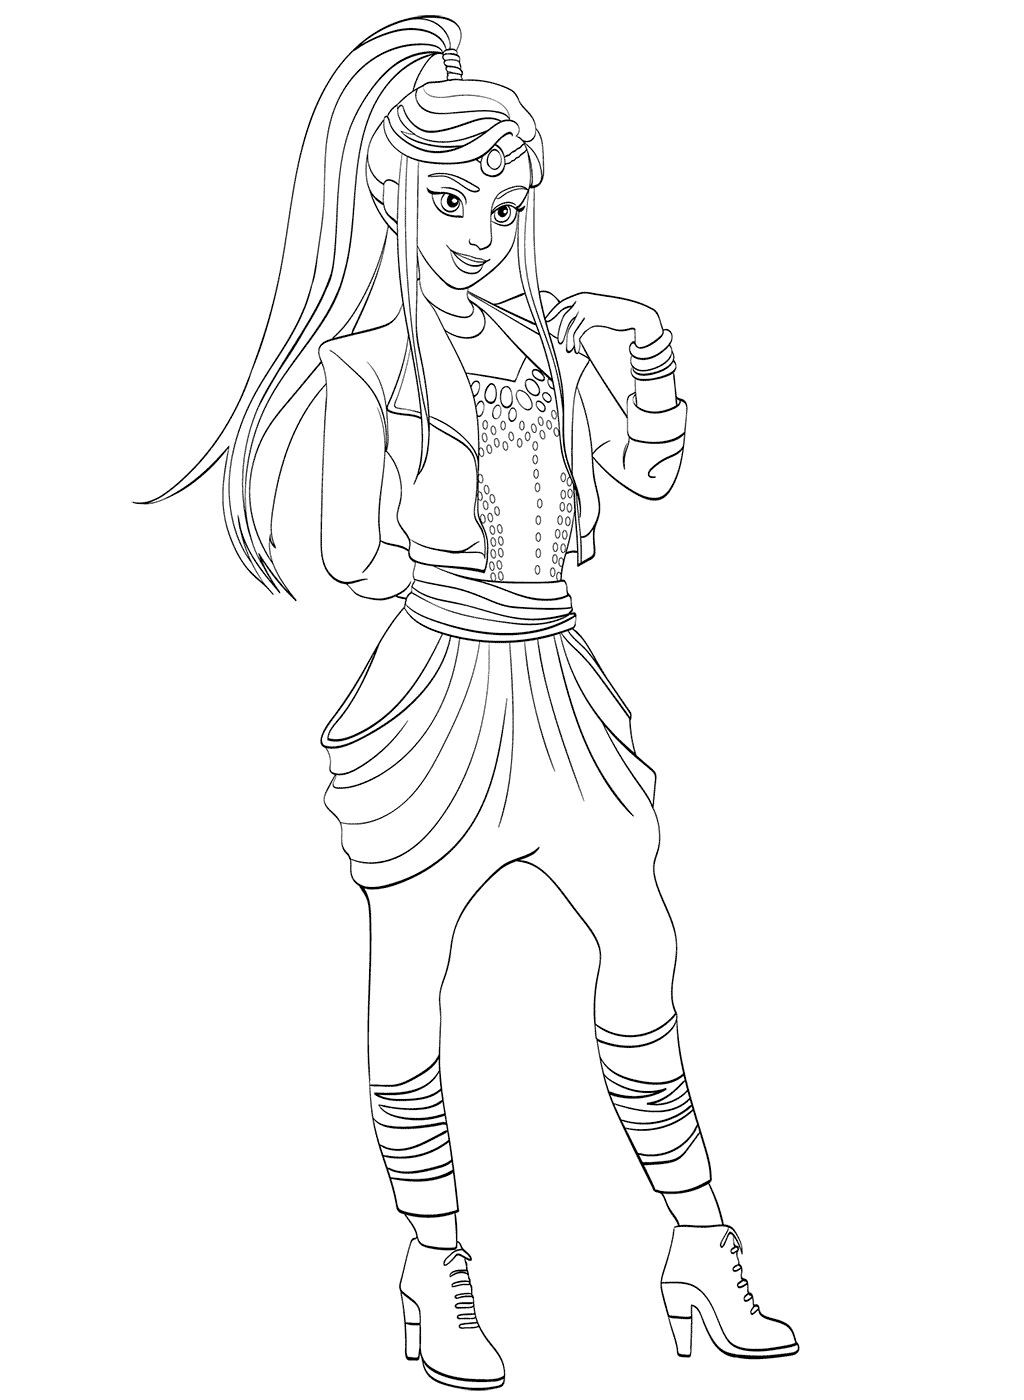 coloring : Descendants Coloring Pages Lovely Kids N Fun Descendants  Coloring Pages ~ queens